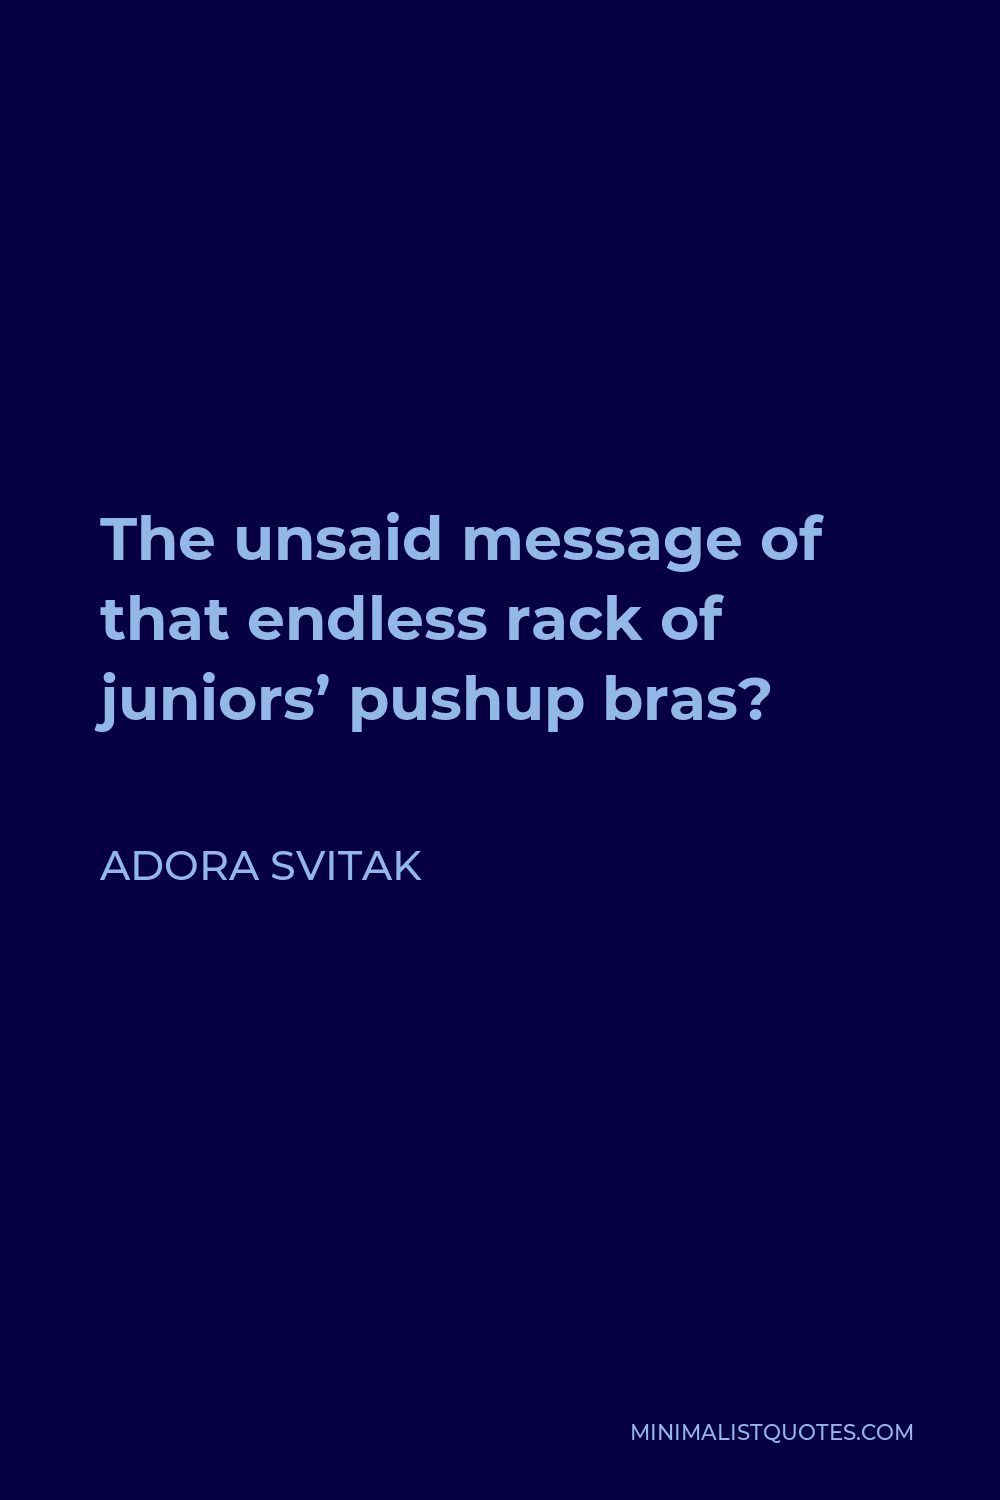 Adora Svitak Quote - The unsaid message of that endless rack of juniors’ pushup bras?